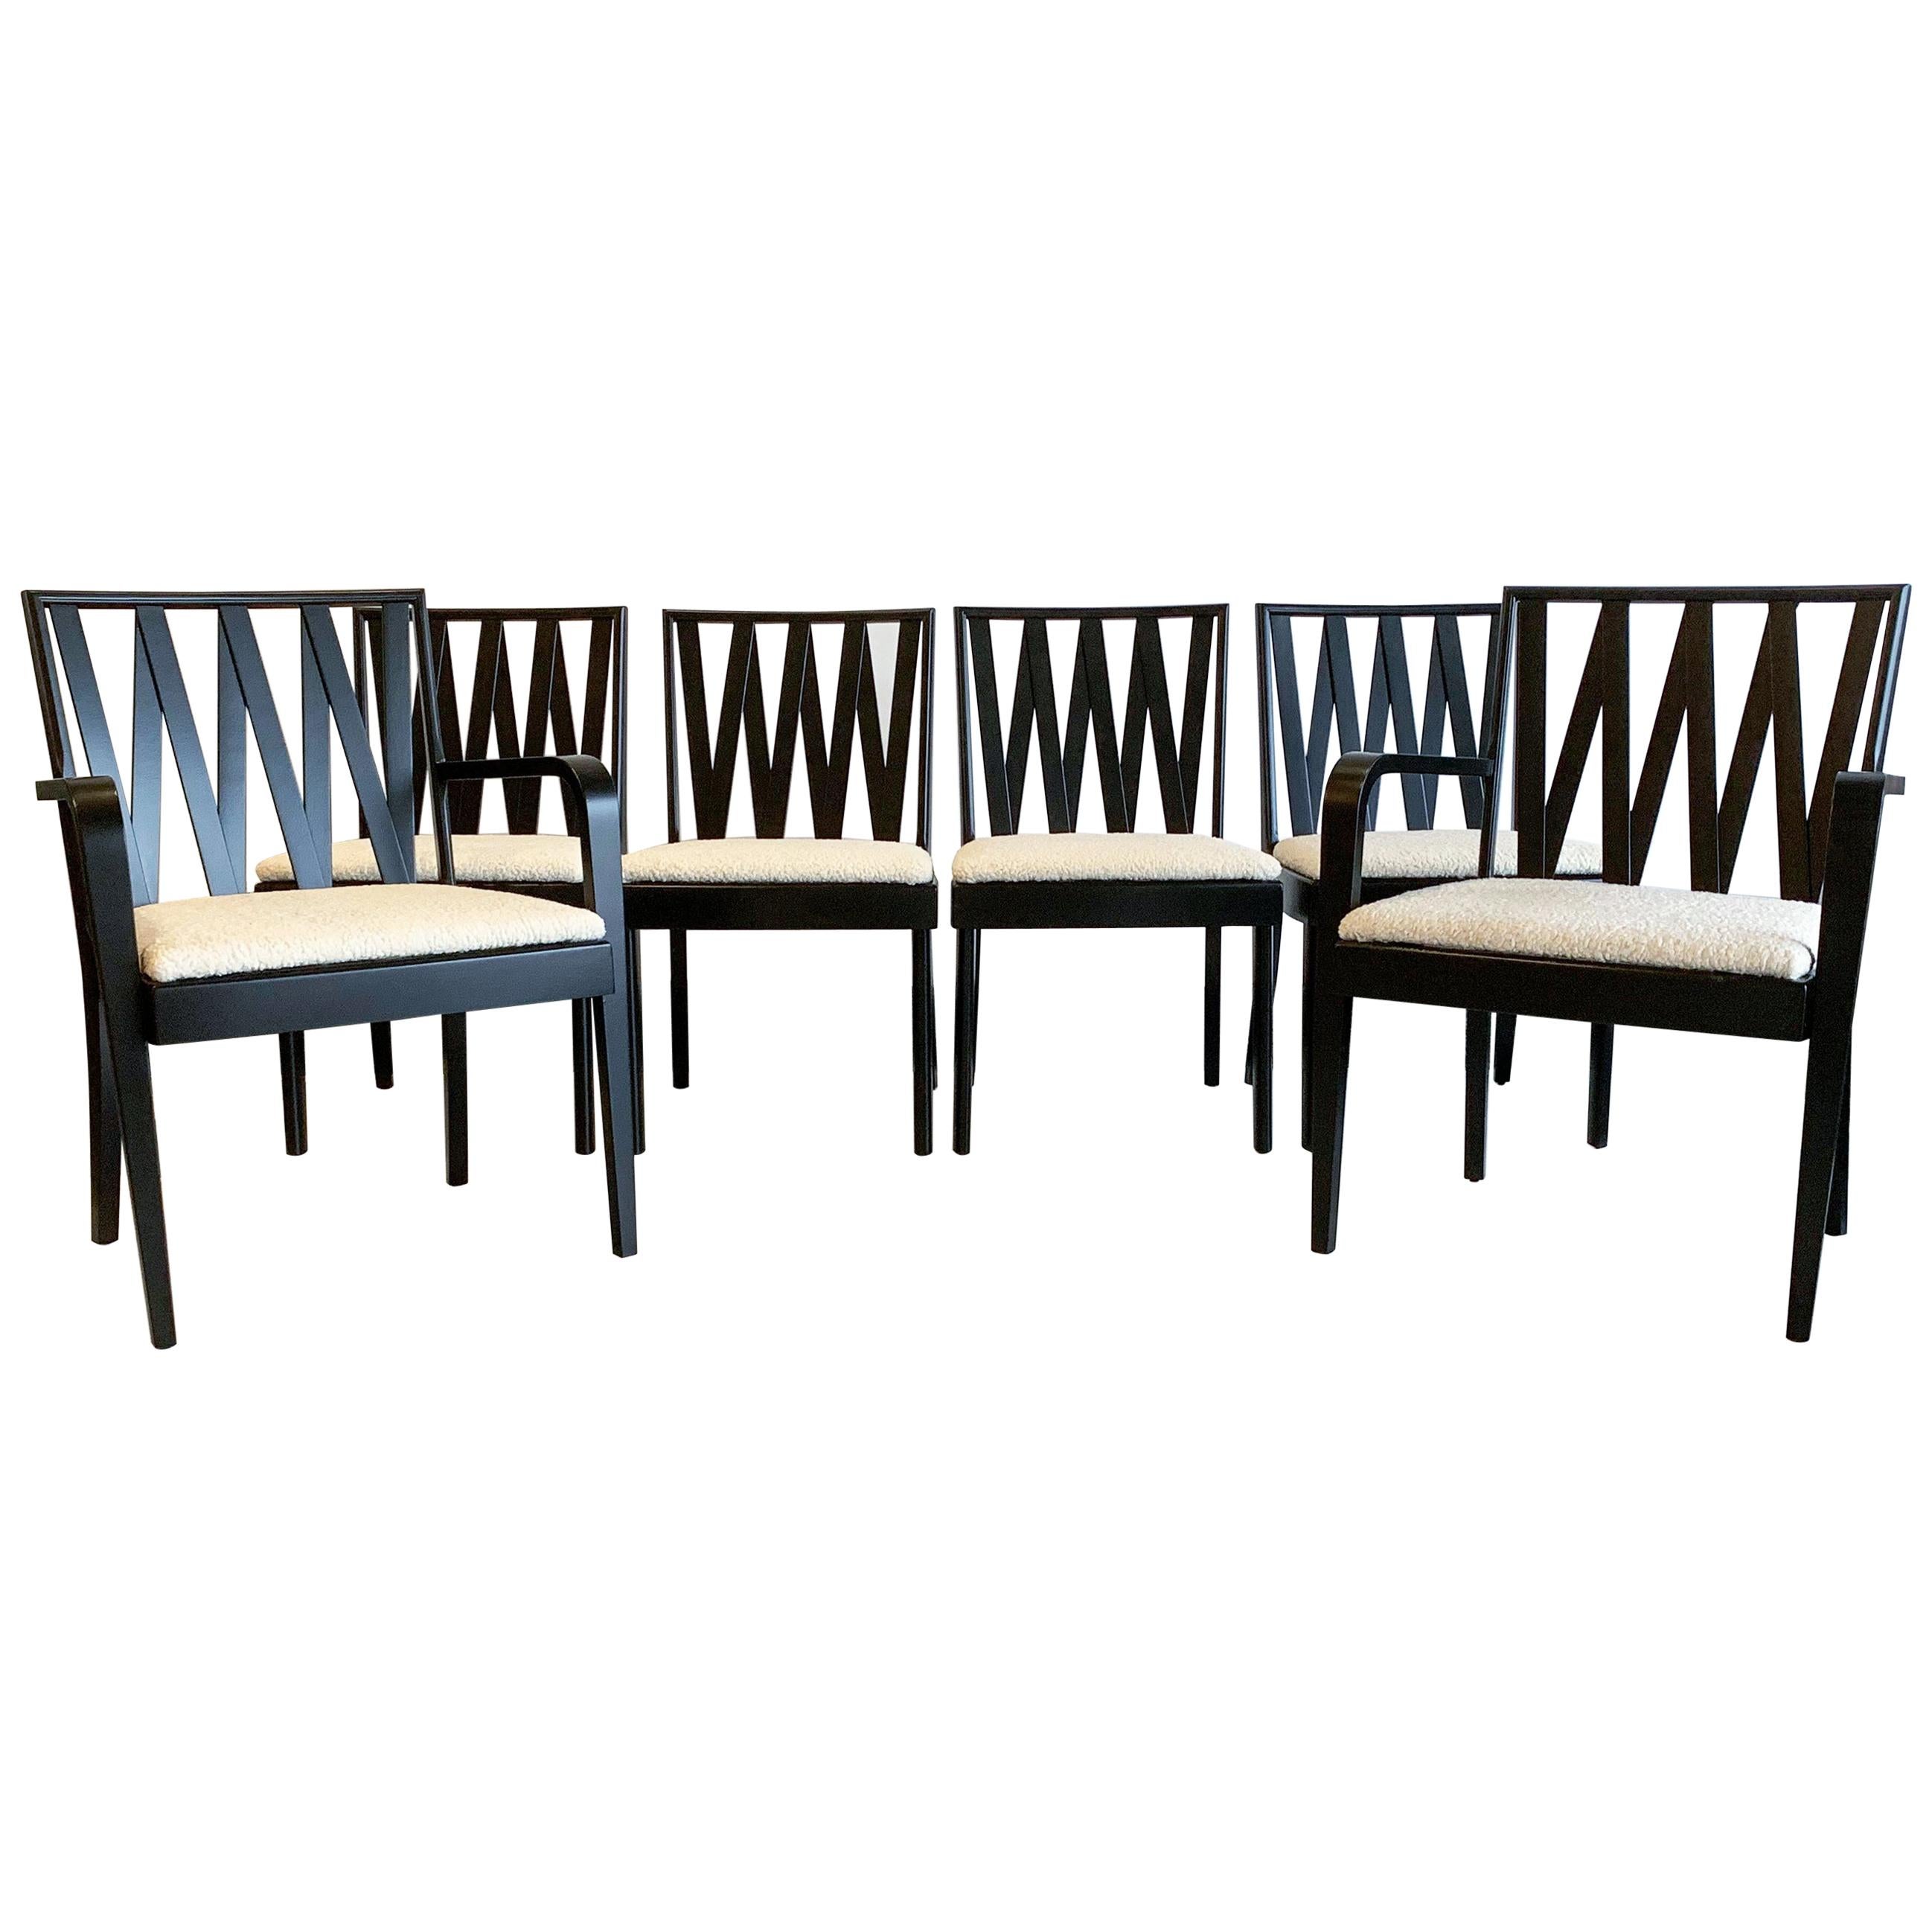 Paul Frankl for Johnson Furniture Zig Zag Dining Chairs, Set of 6